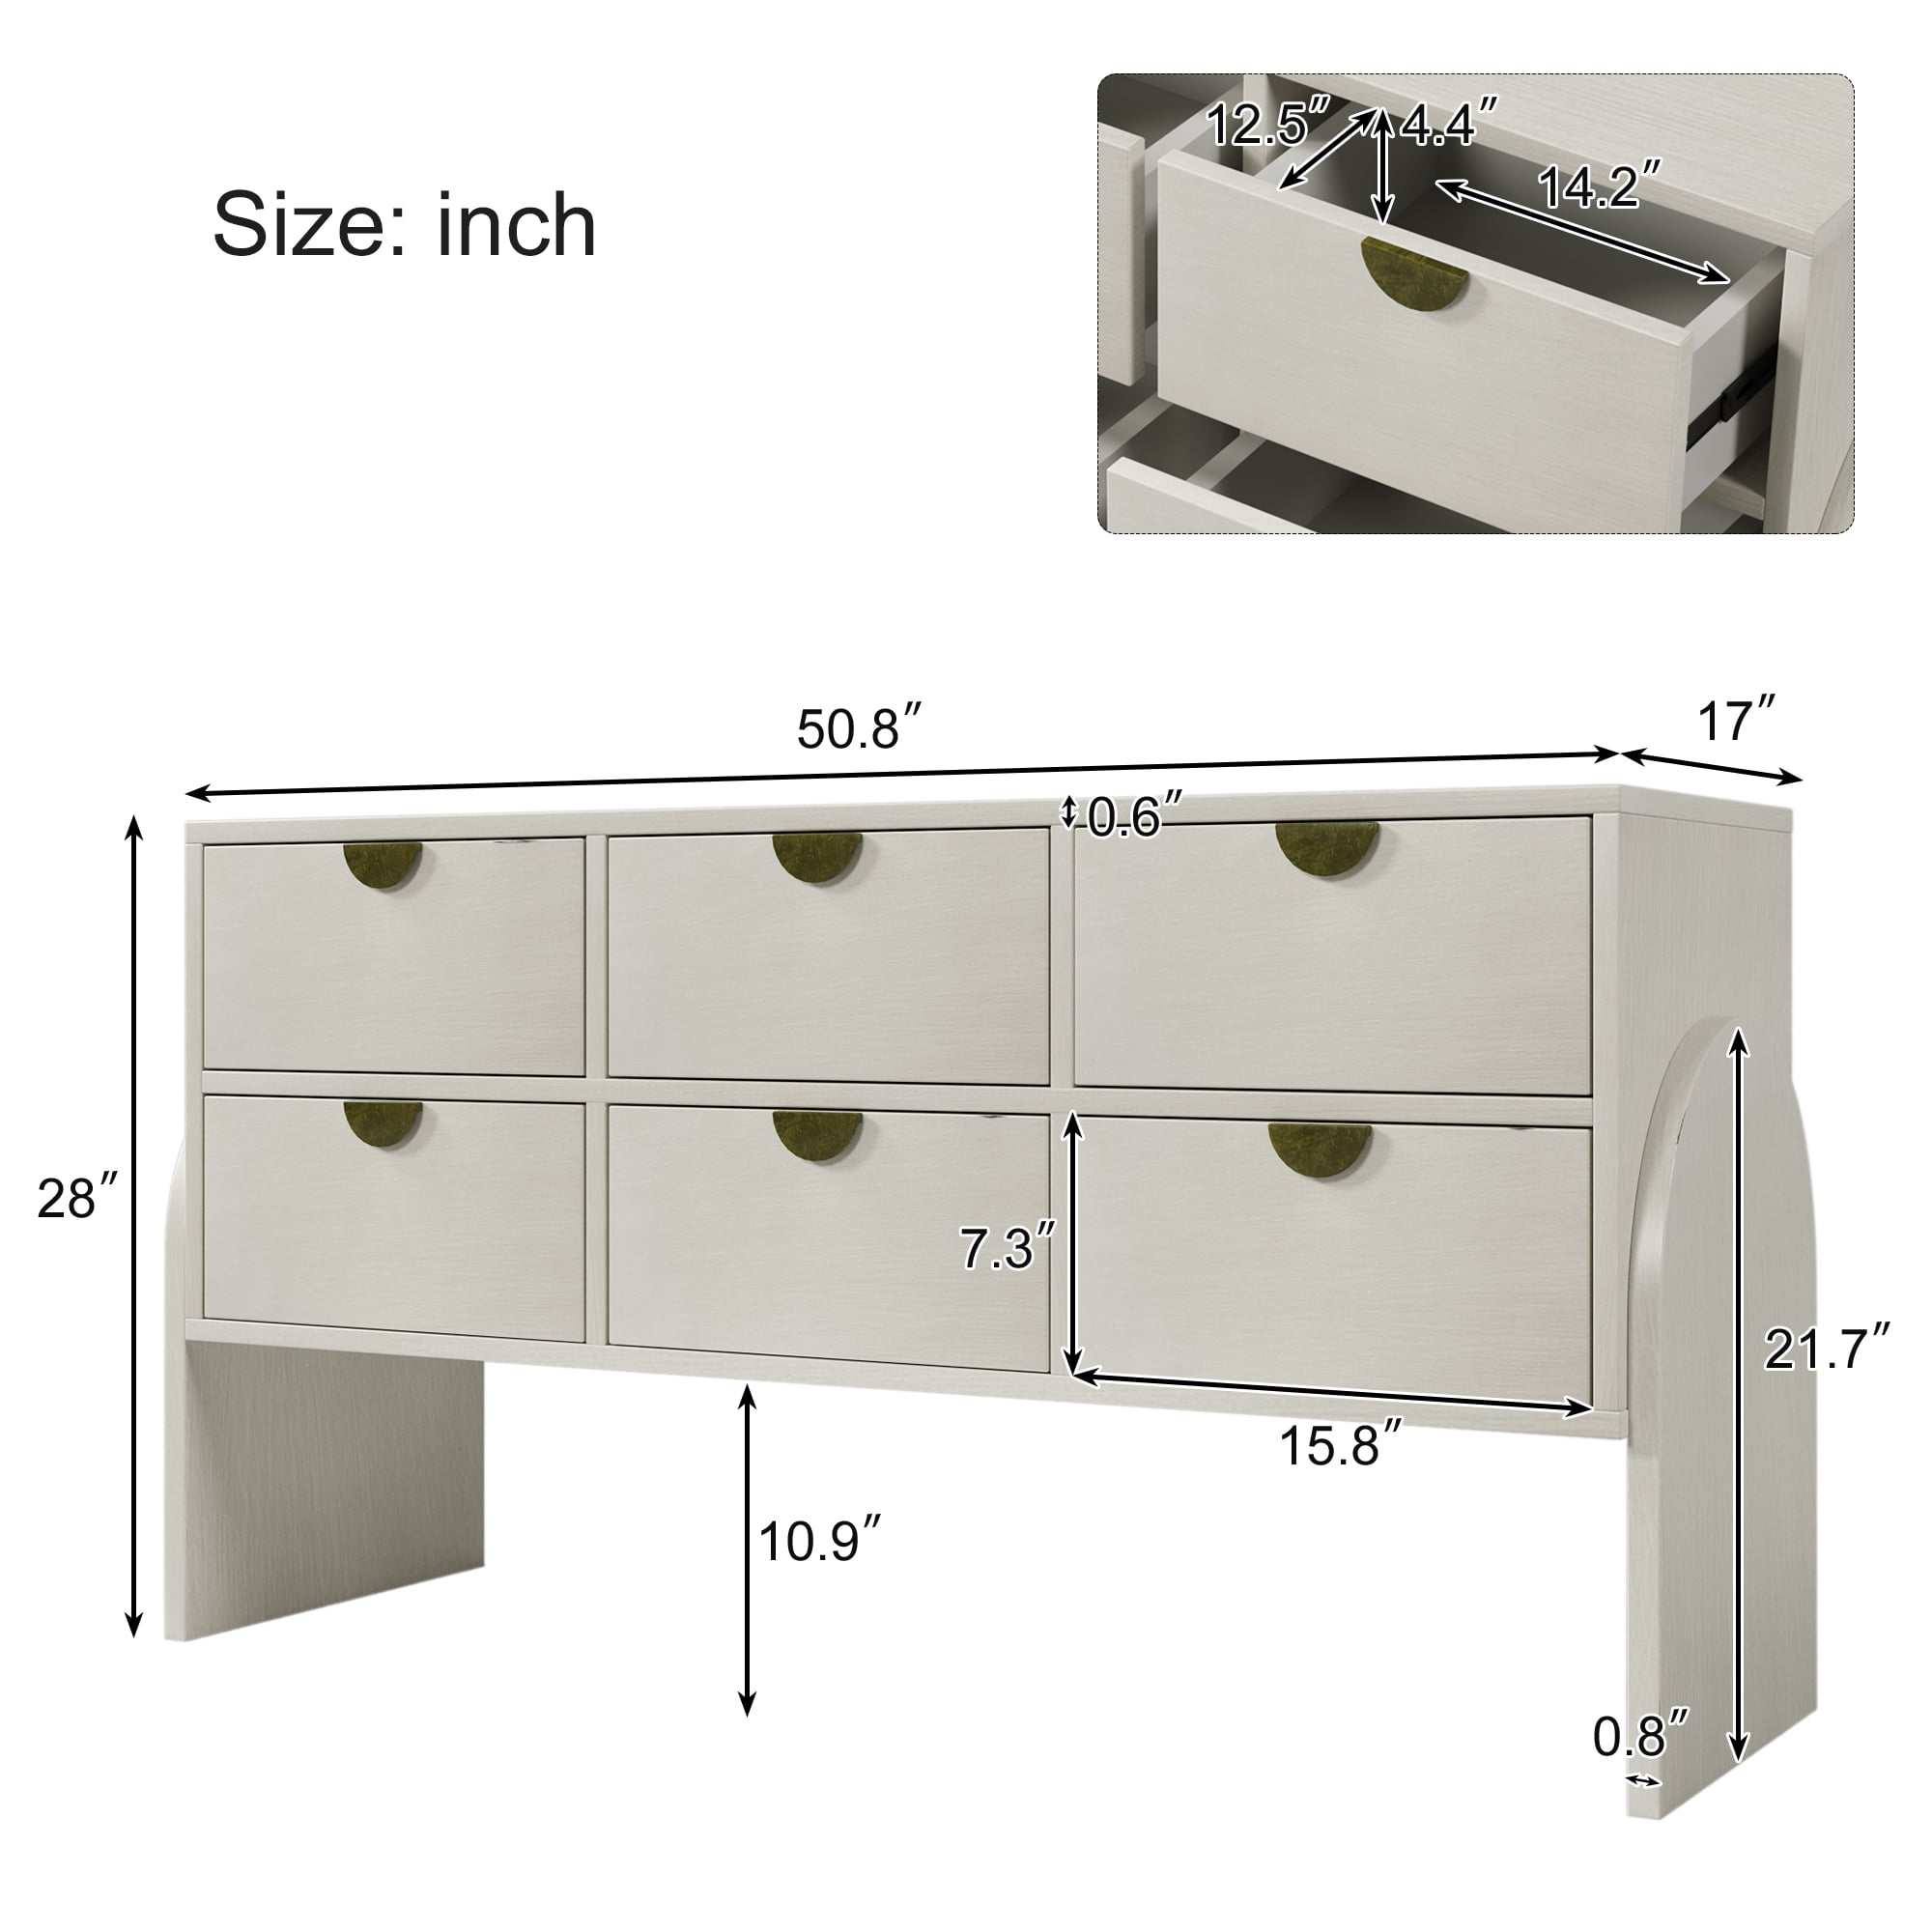 Retro Style Rubber Wood Structure Six-drawer Dresser - WF303668AAK